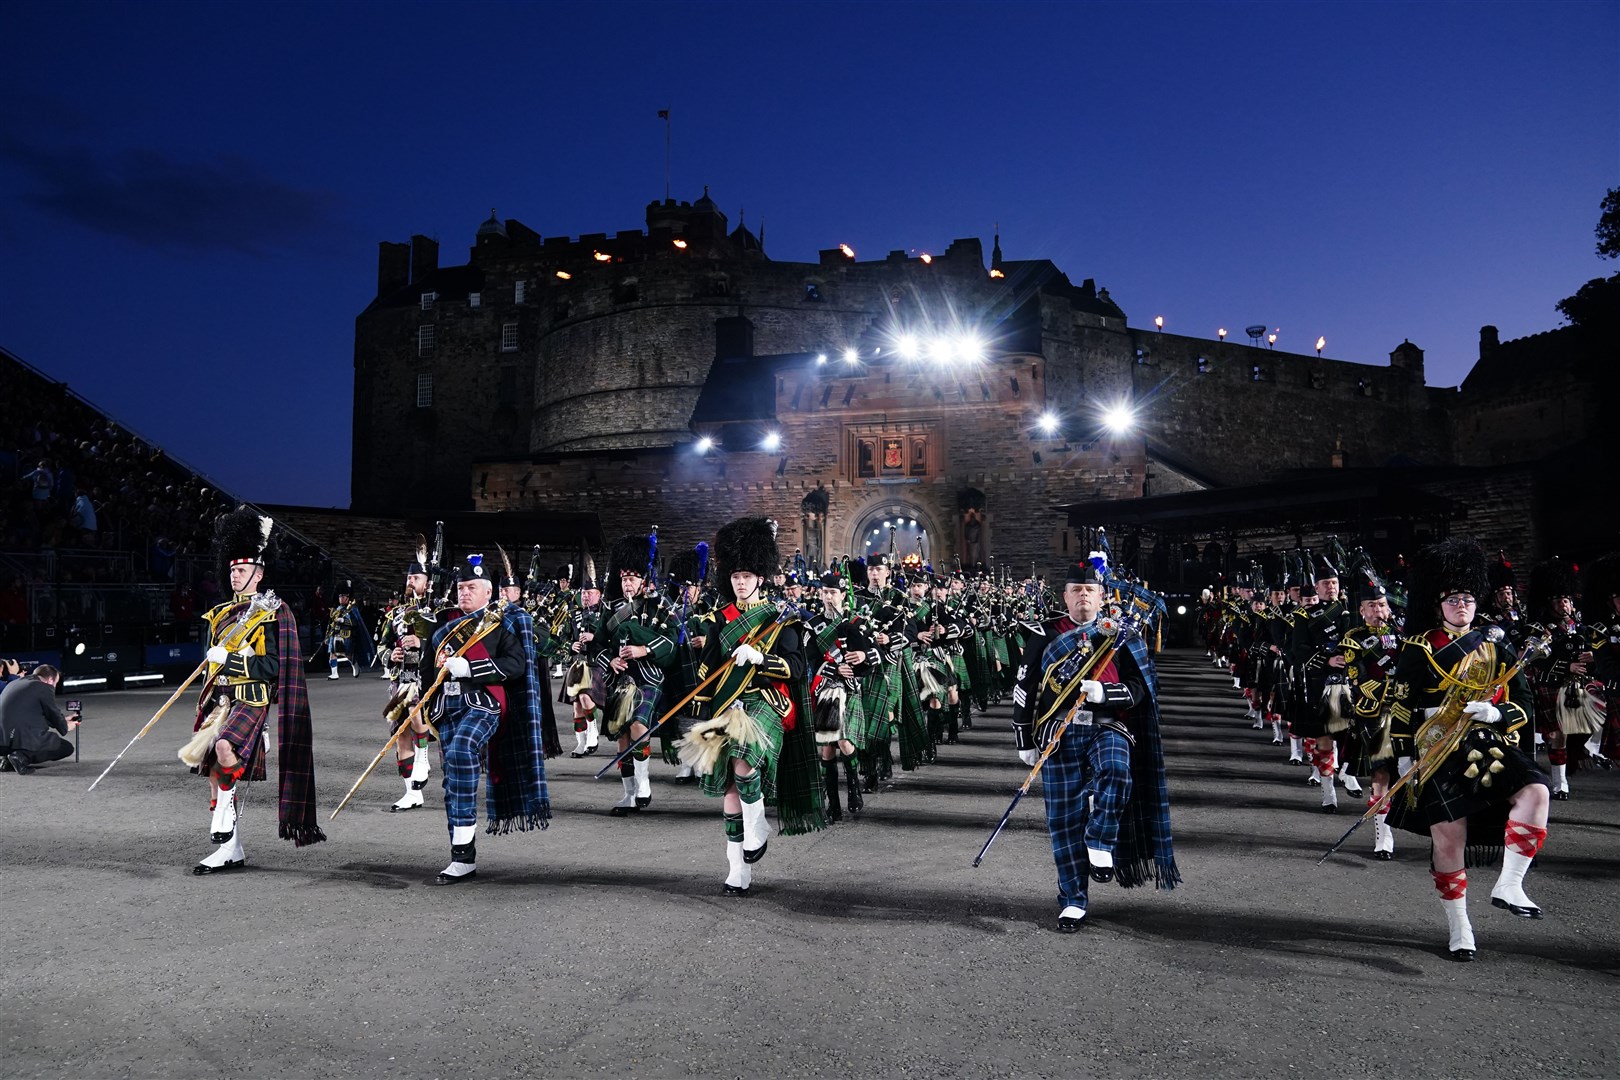 Members of the Massed Pipes and Drums taking part in the Royal Edinburgh Military Tattoo at Edinburgh Castle (Jane Barlow/PA)